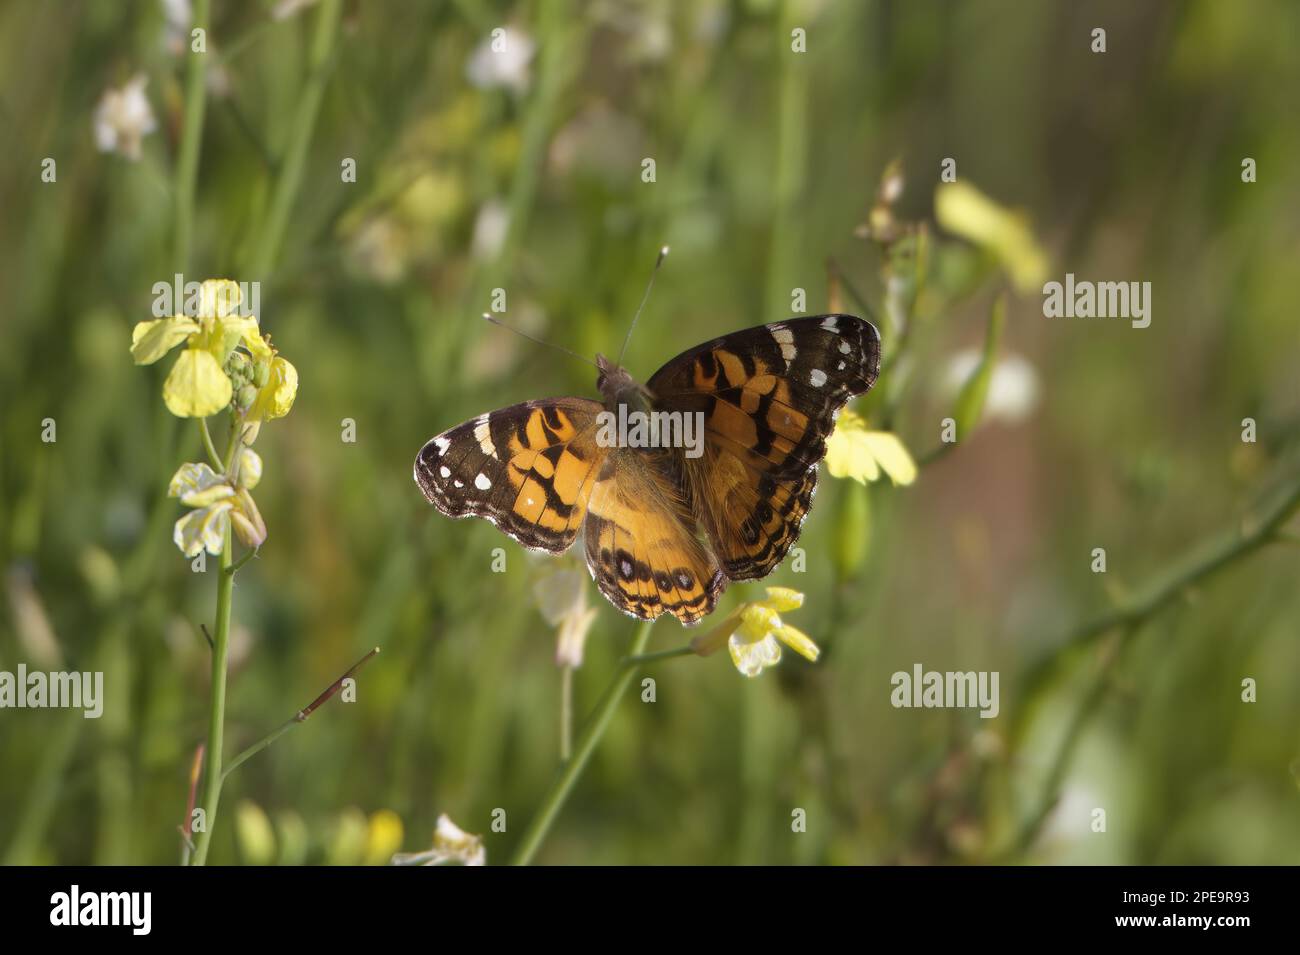 A small orange and black butterfly spreads its wings on a small yellow-white flower. Stock Photo